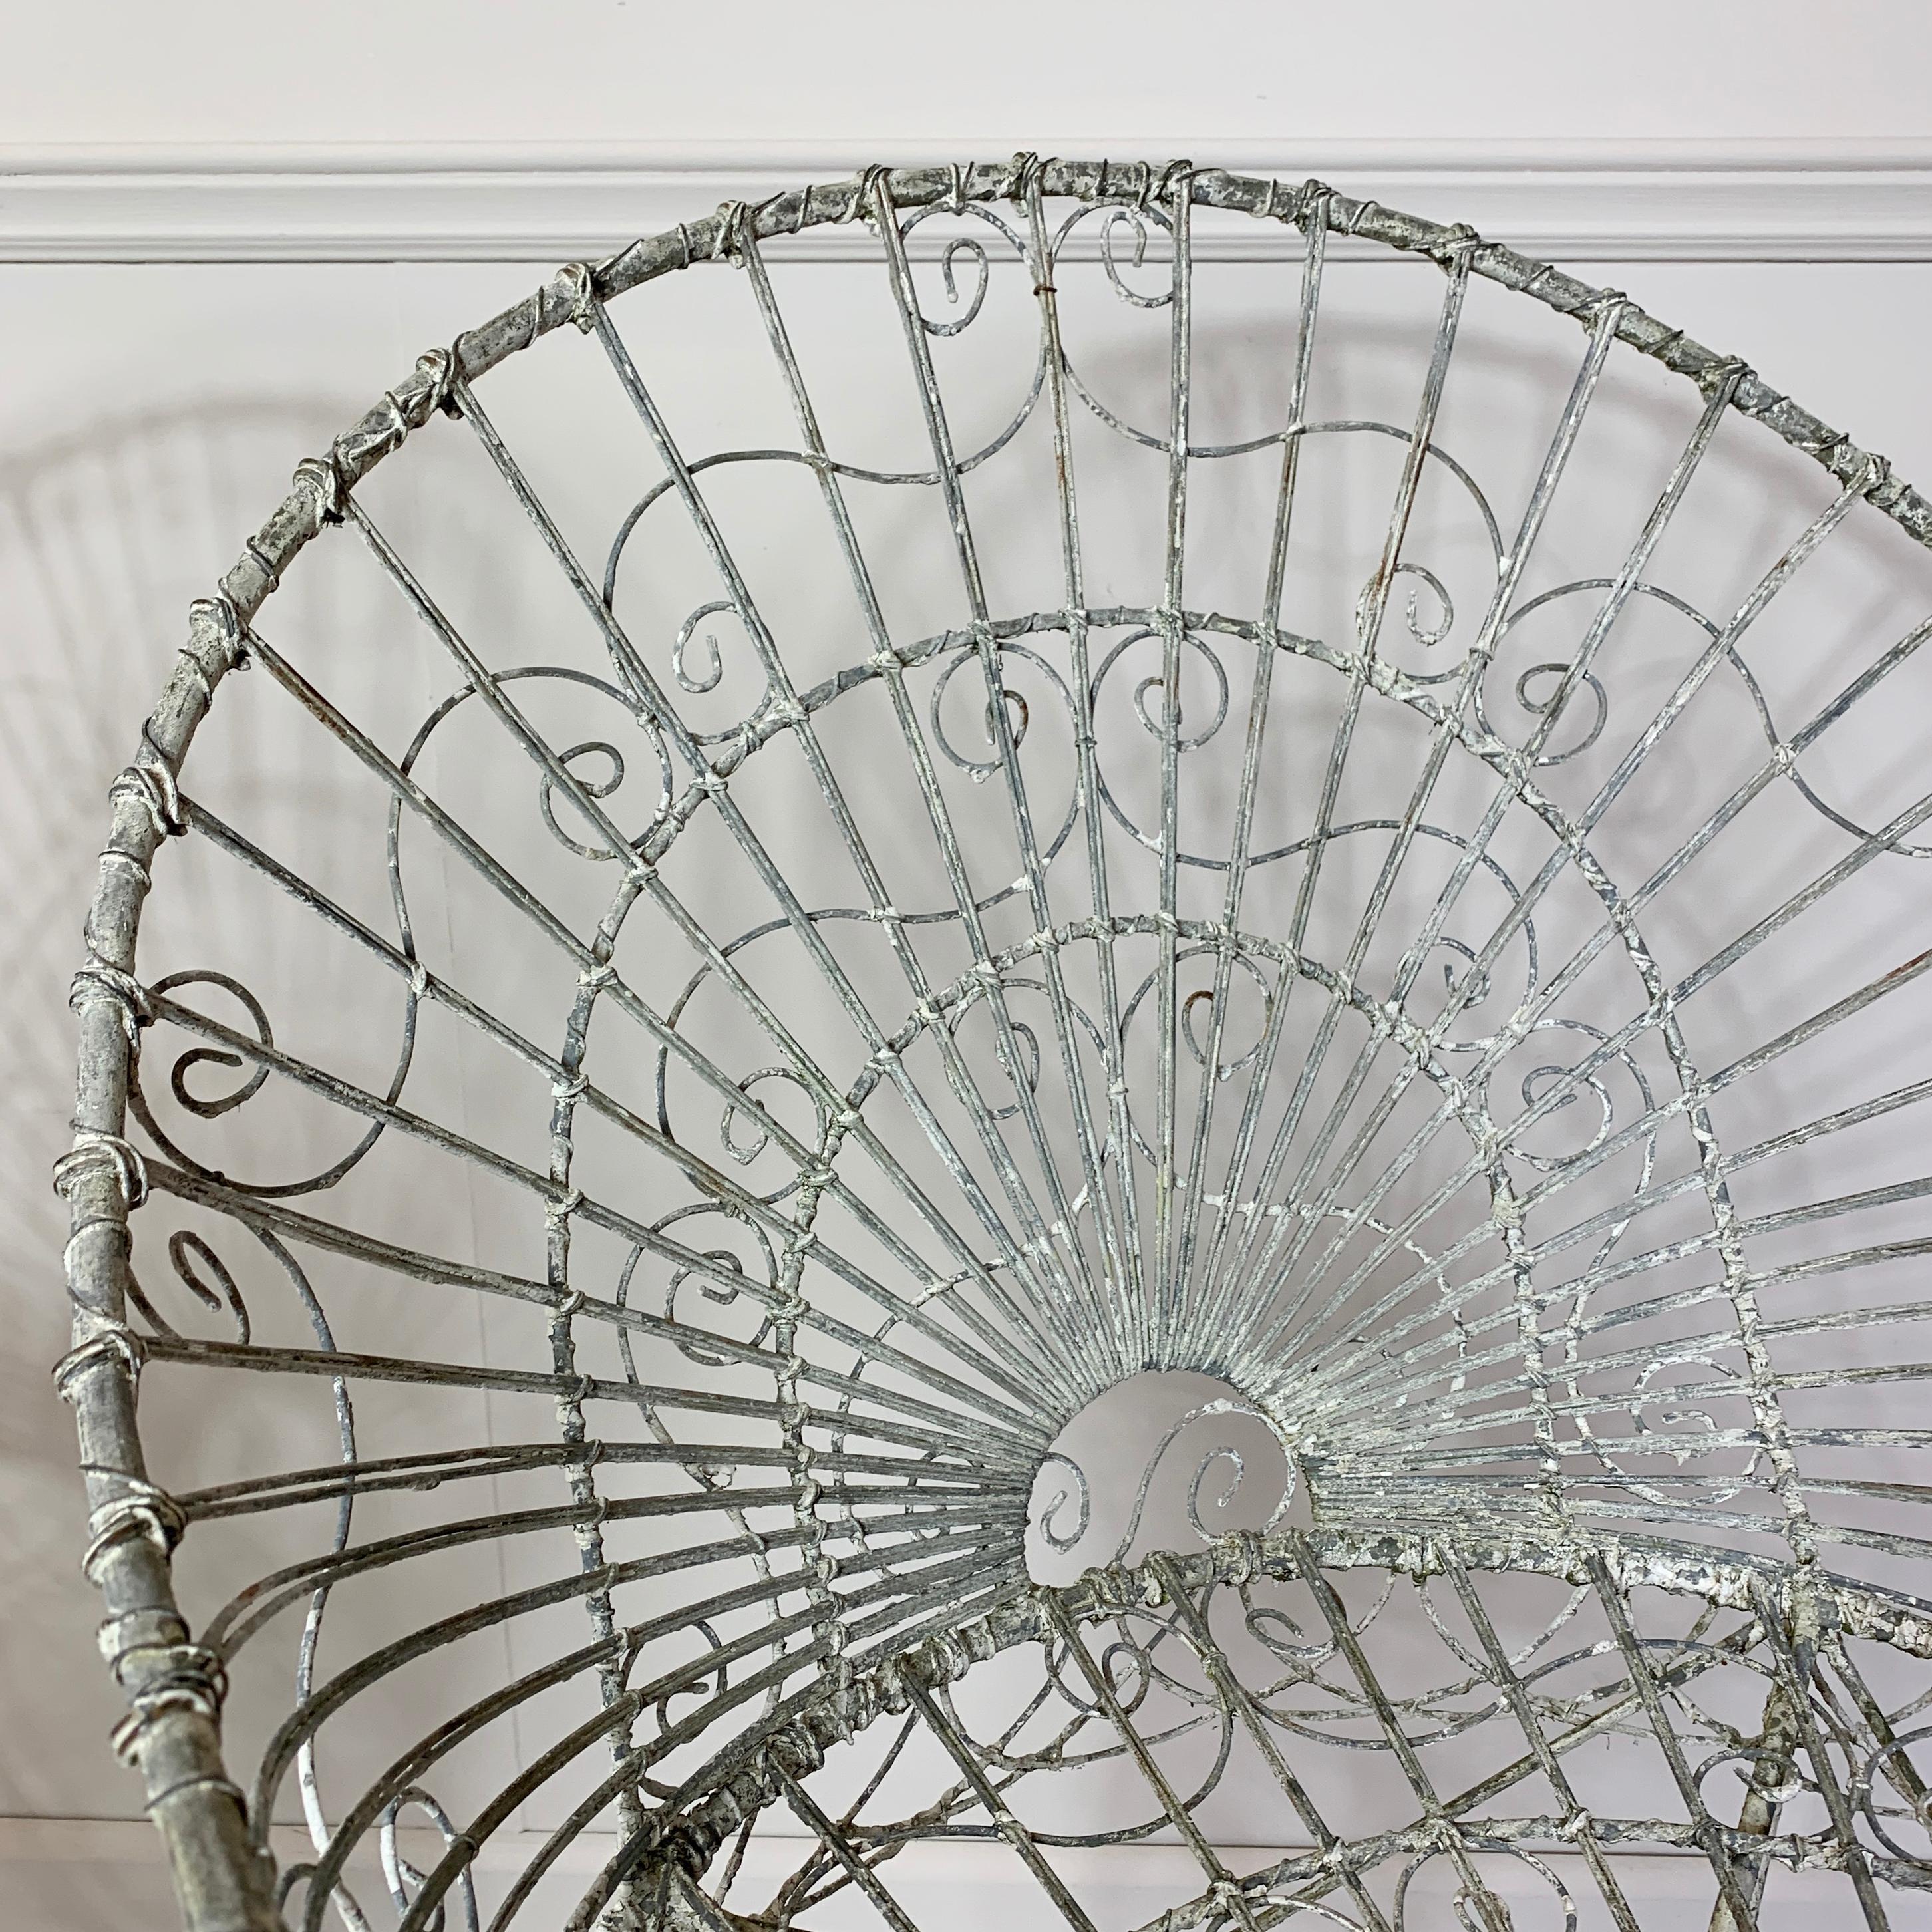 Edwardian wirework garden chairs
A beautiful pair of Edwardian wire work garden chairs, circa 1910
Stunning detailing and scalloped edge skirt
Great condition, no missing pieces or breaks
Price is for the pair
Measures: 87cm height, 59cm width,